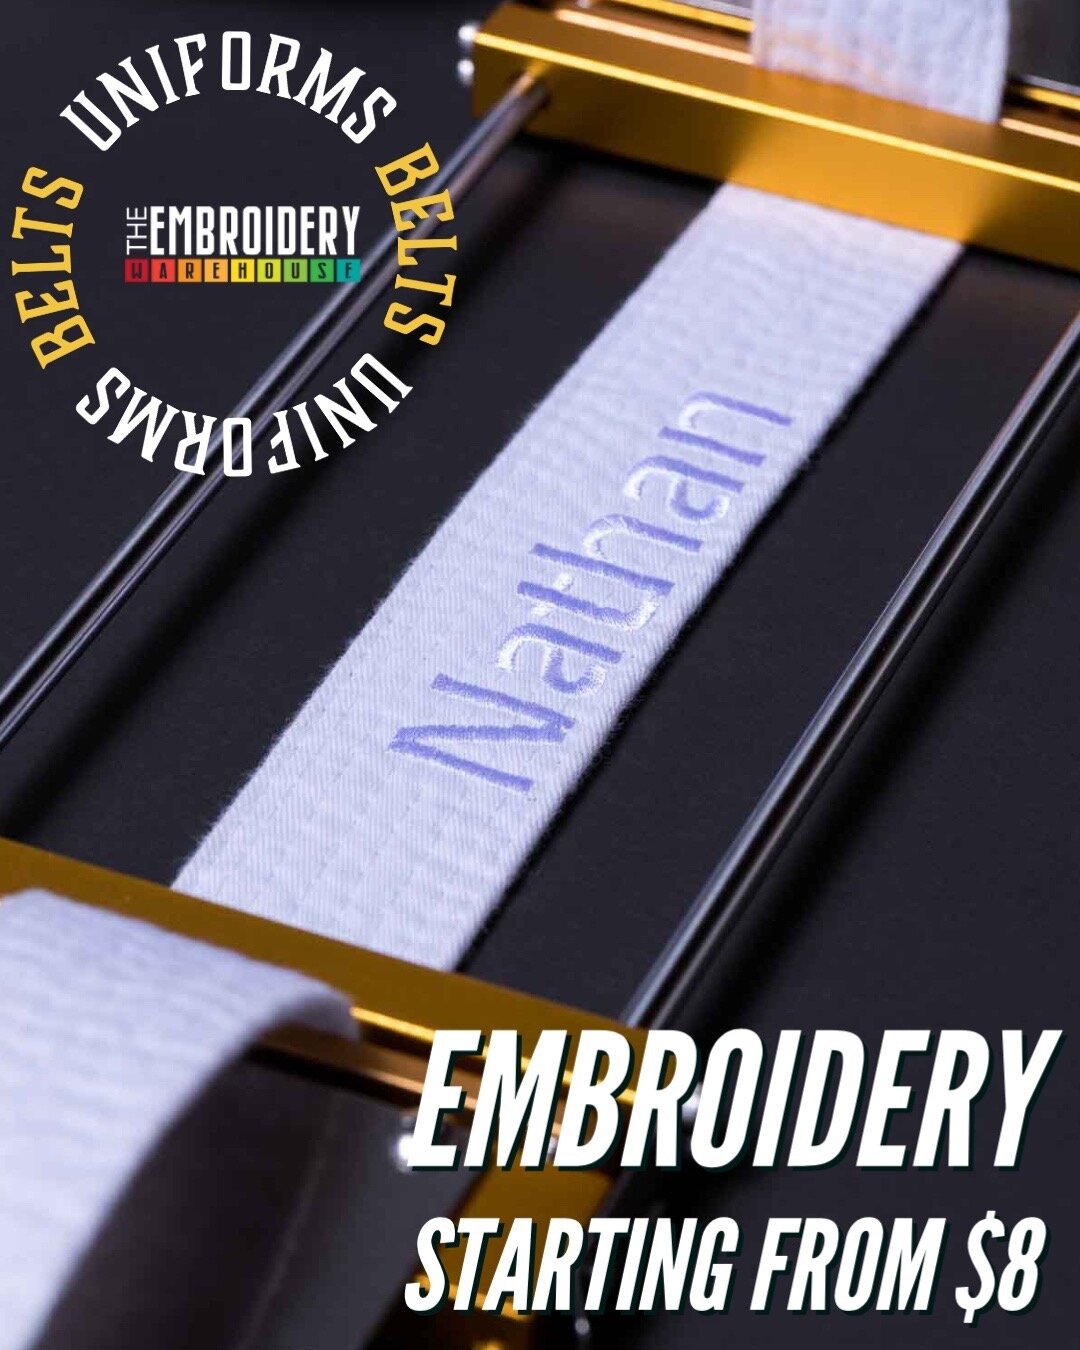 Got gear that need branding? 
We can also embroider specialty items like as belts, shoes and bags.  Get it touch to talk about what's possible. 

📞 0800 STITCH IT  or (07) 949 9255
📲 sales@embroiderywarehouse.co.nz
🖥️ http://www.embroiderywarehous